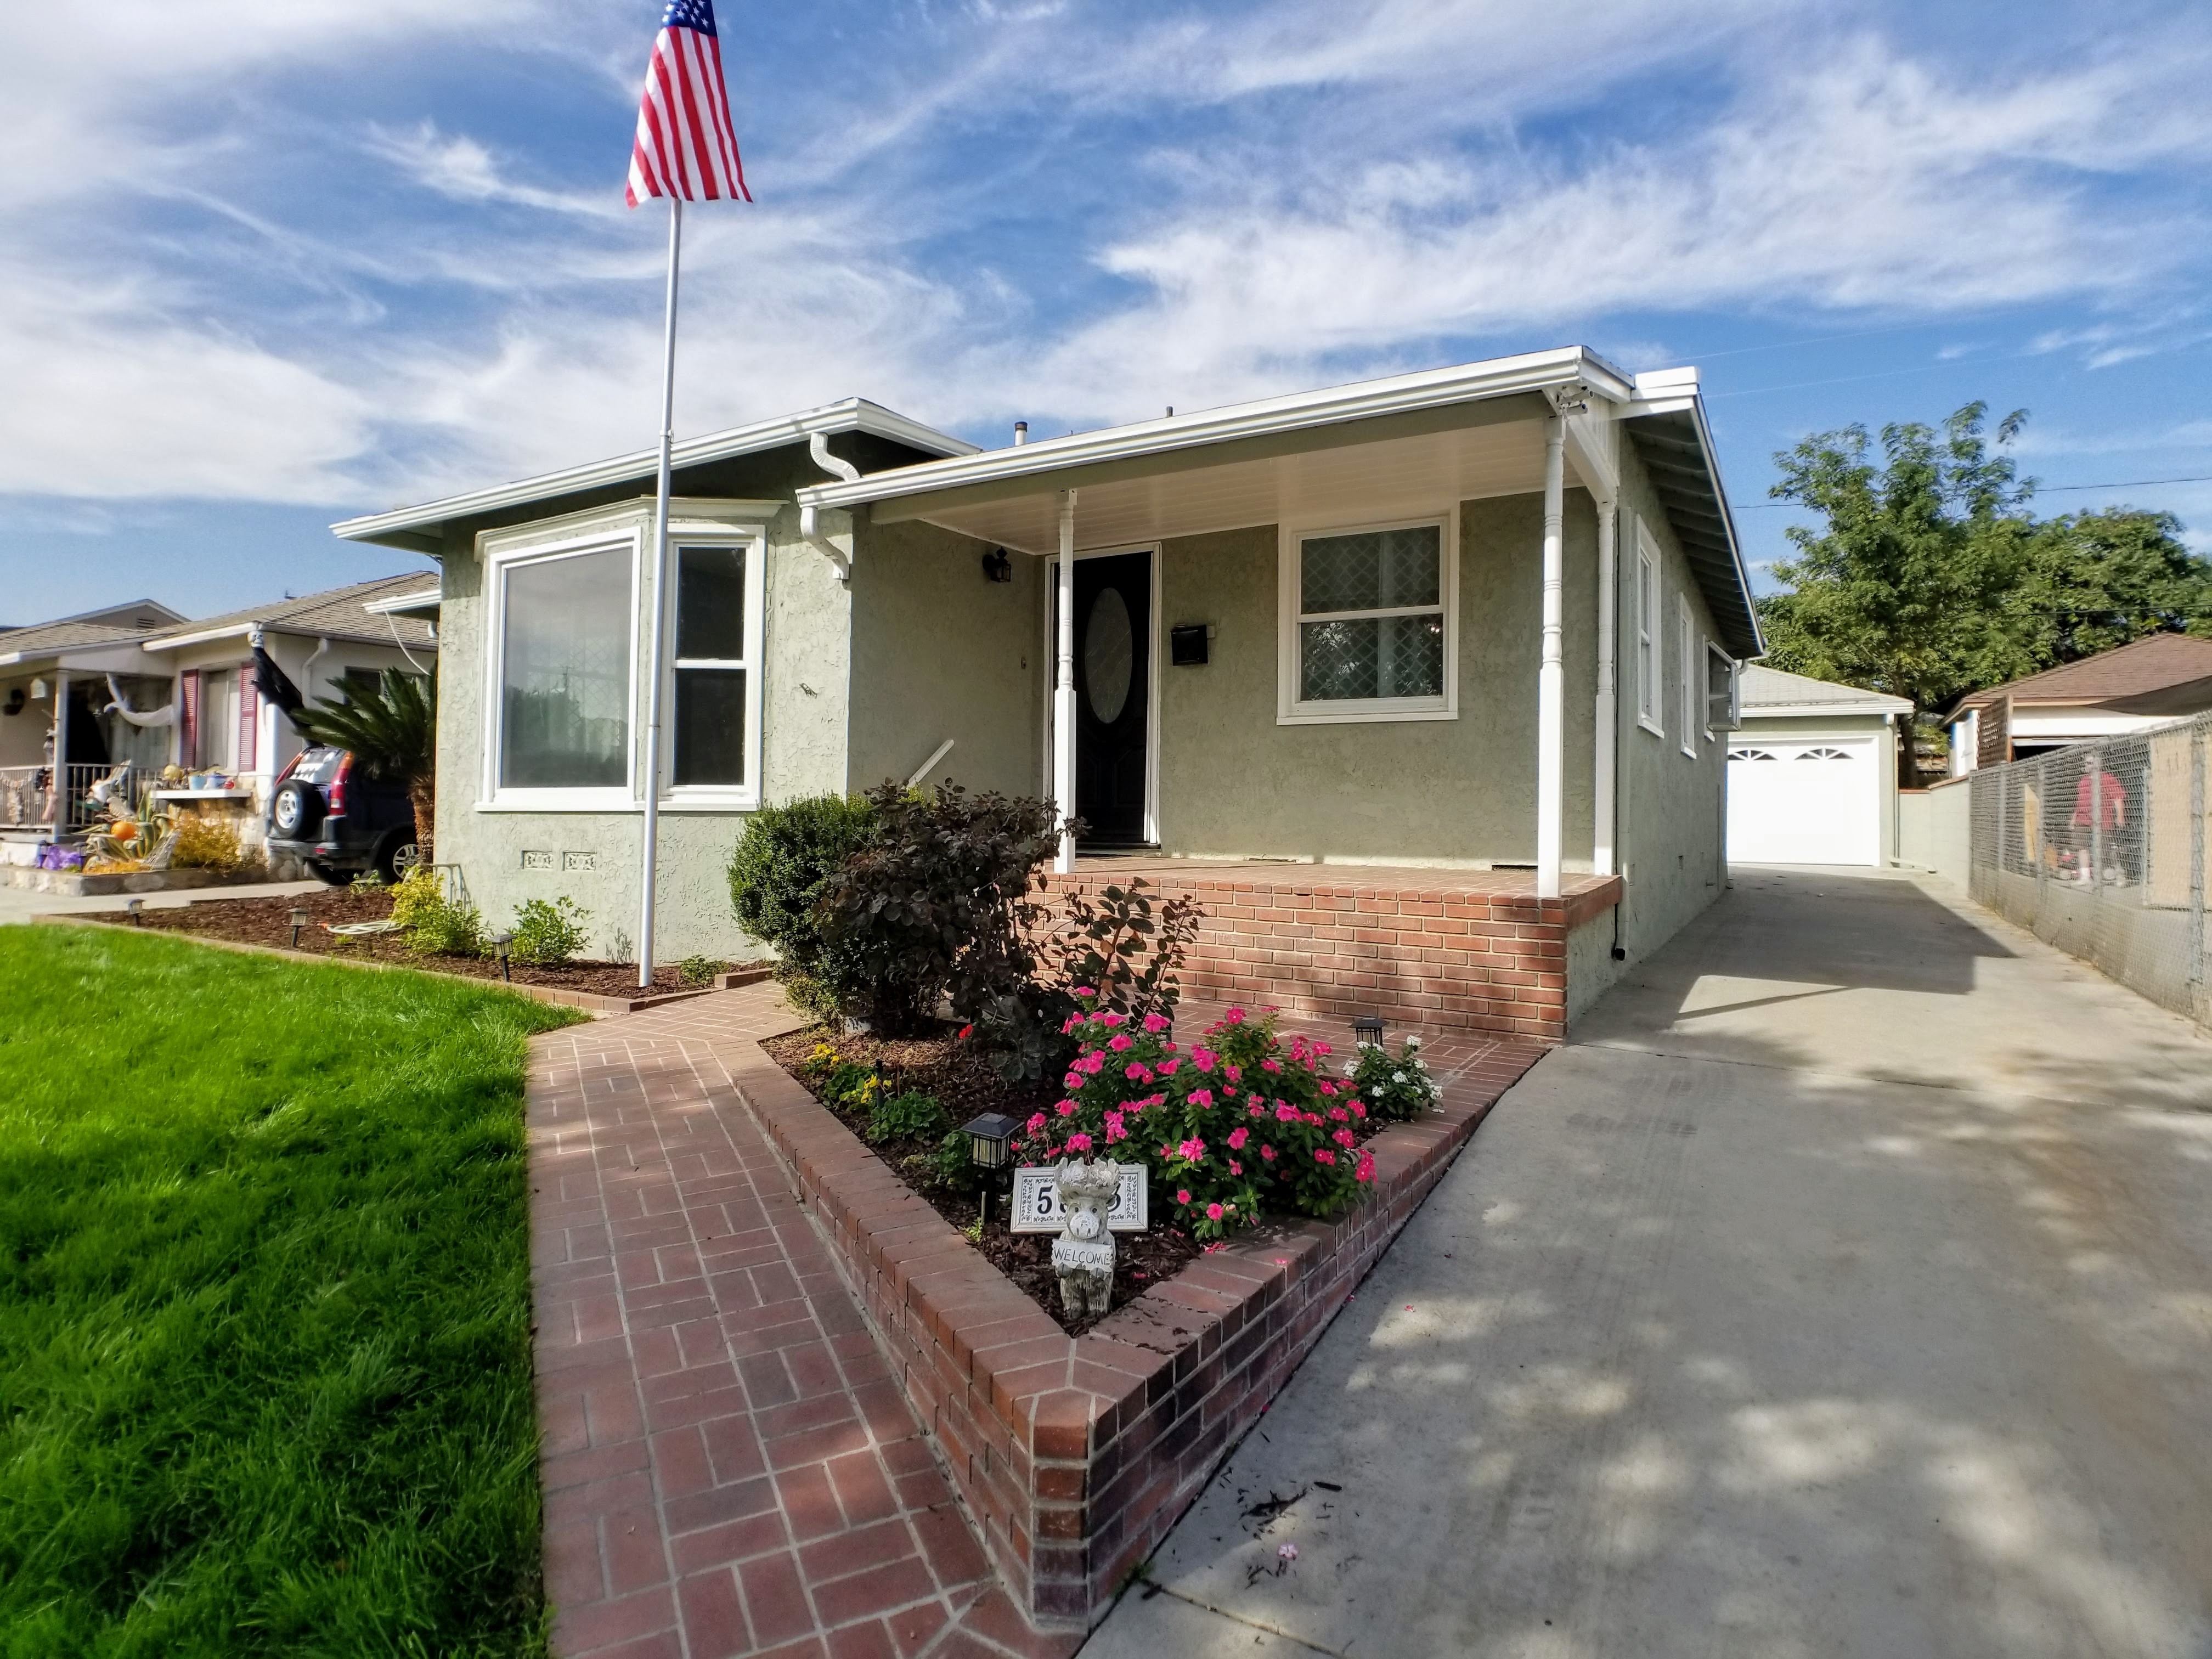 Property Listing For 11/04/20